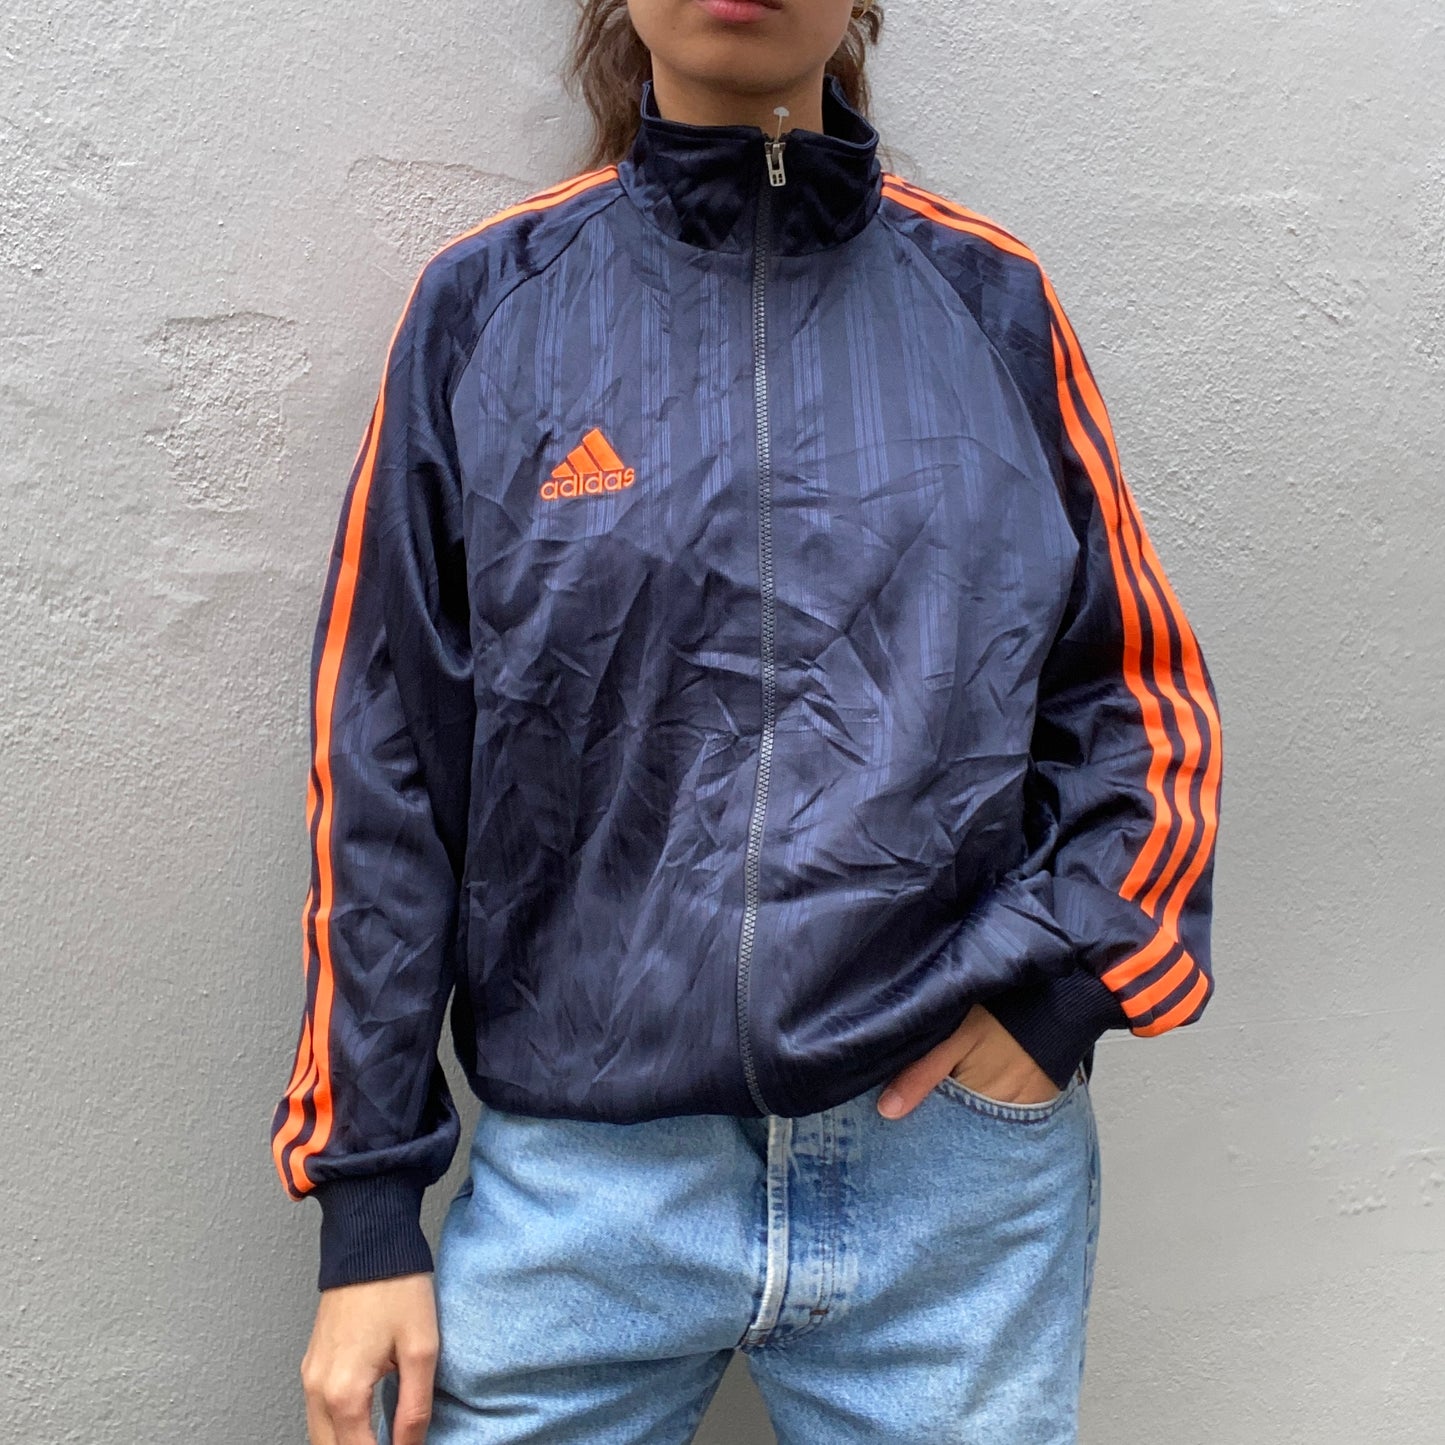 Blue and Orange Adidas Track Suit front